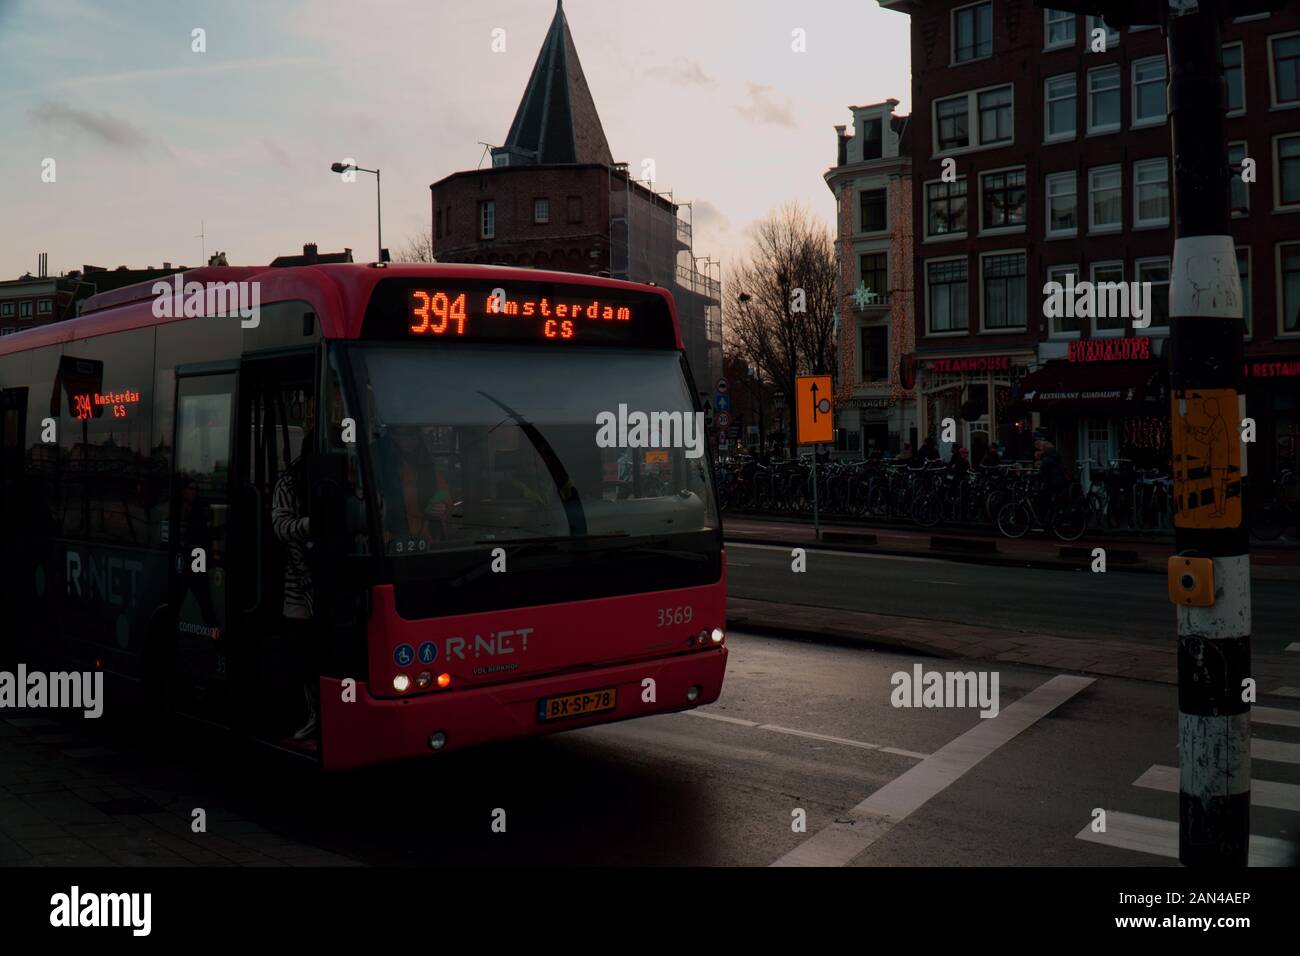 Bus stopped at traffic light in Amsterdam, Netherlands Stock Photo